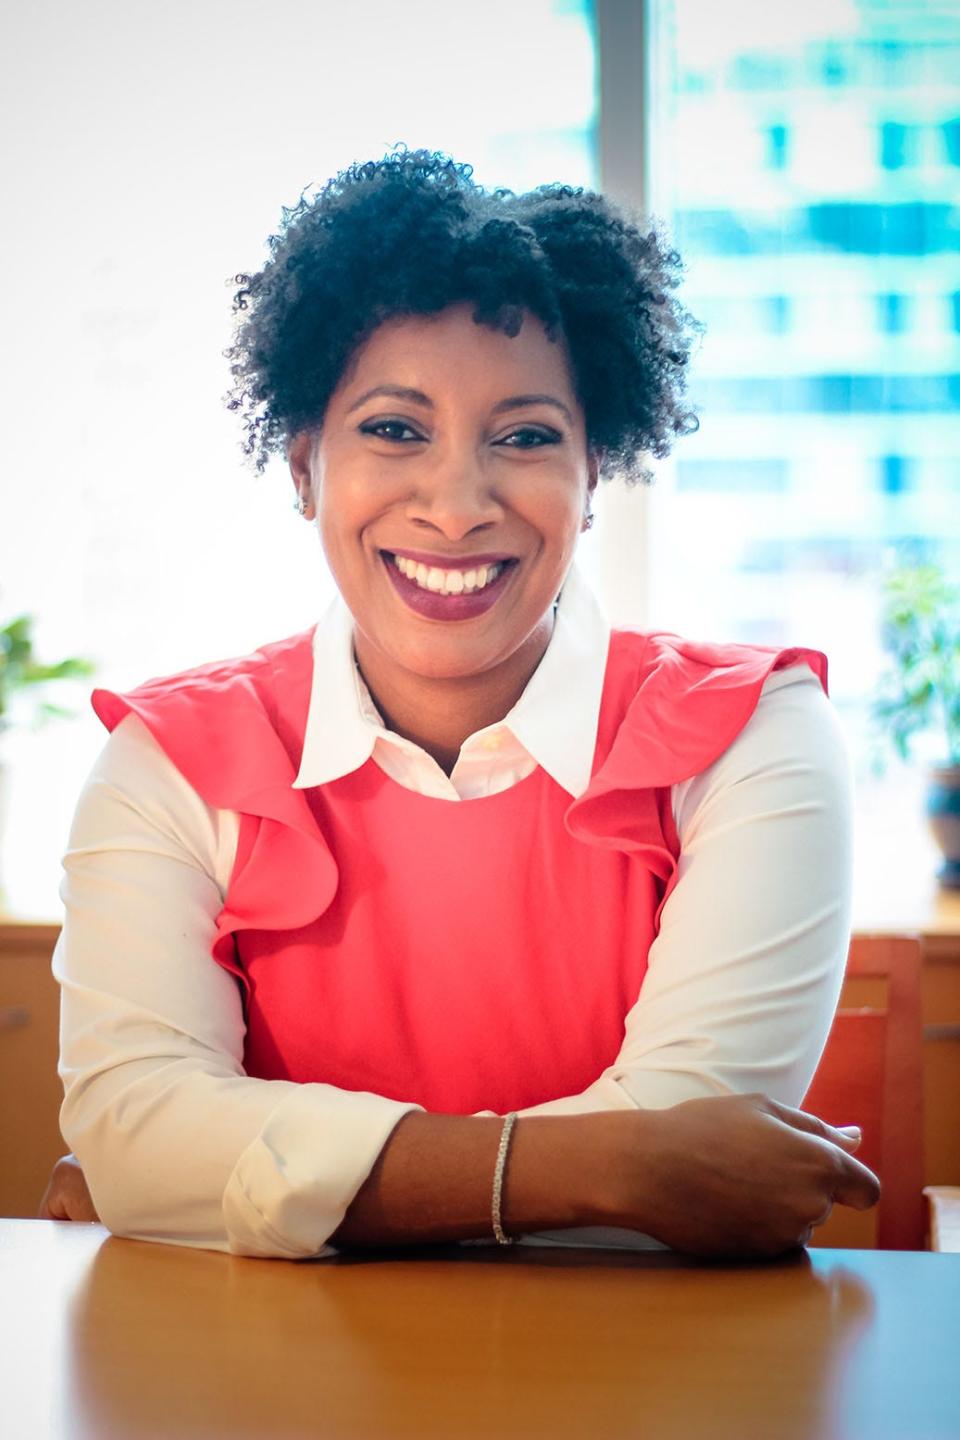 Kandace Thomas has been appointed executive director for First 8 Memphis, the nonprofit that oversees funding and programming for early childhood education. Thomas replaces interim director Regina Walker in April 2020.